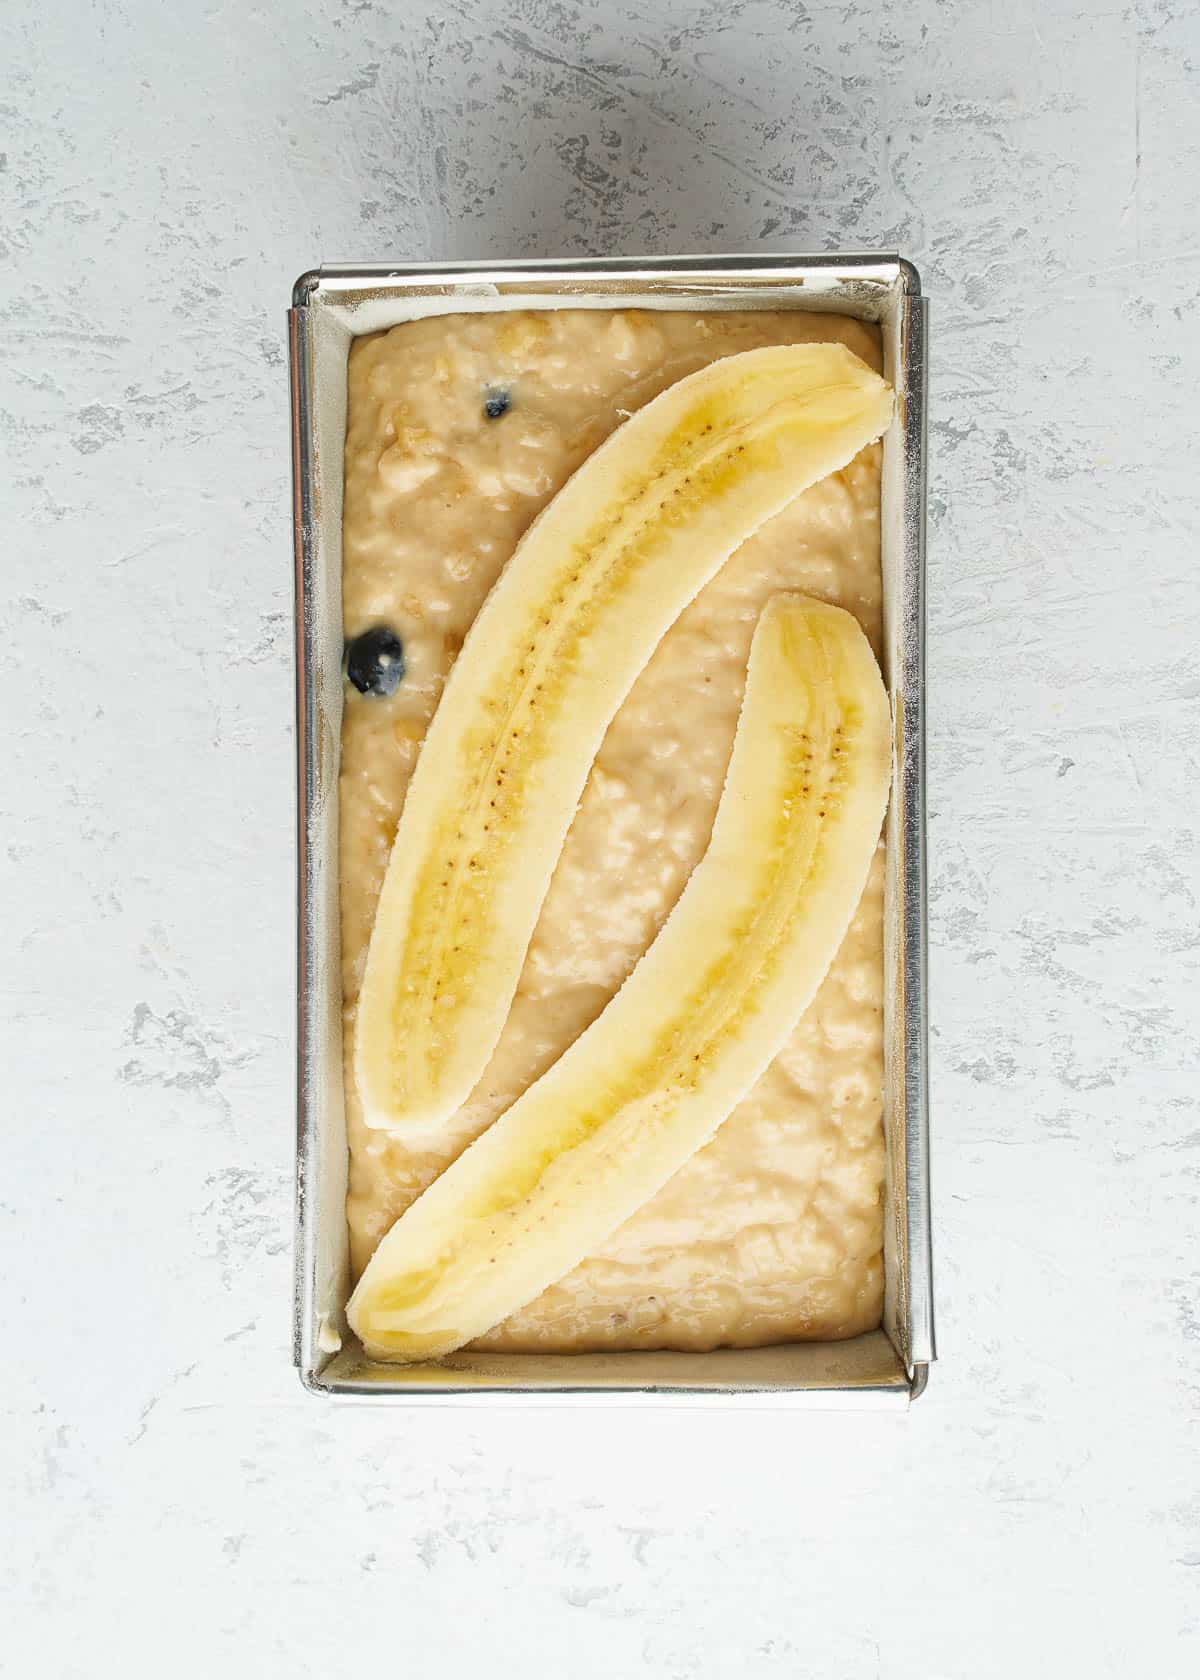 A loaf pan full of batter to make a blueberry banana bread, with a whole banana on top.